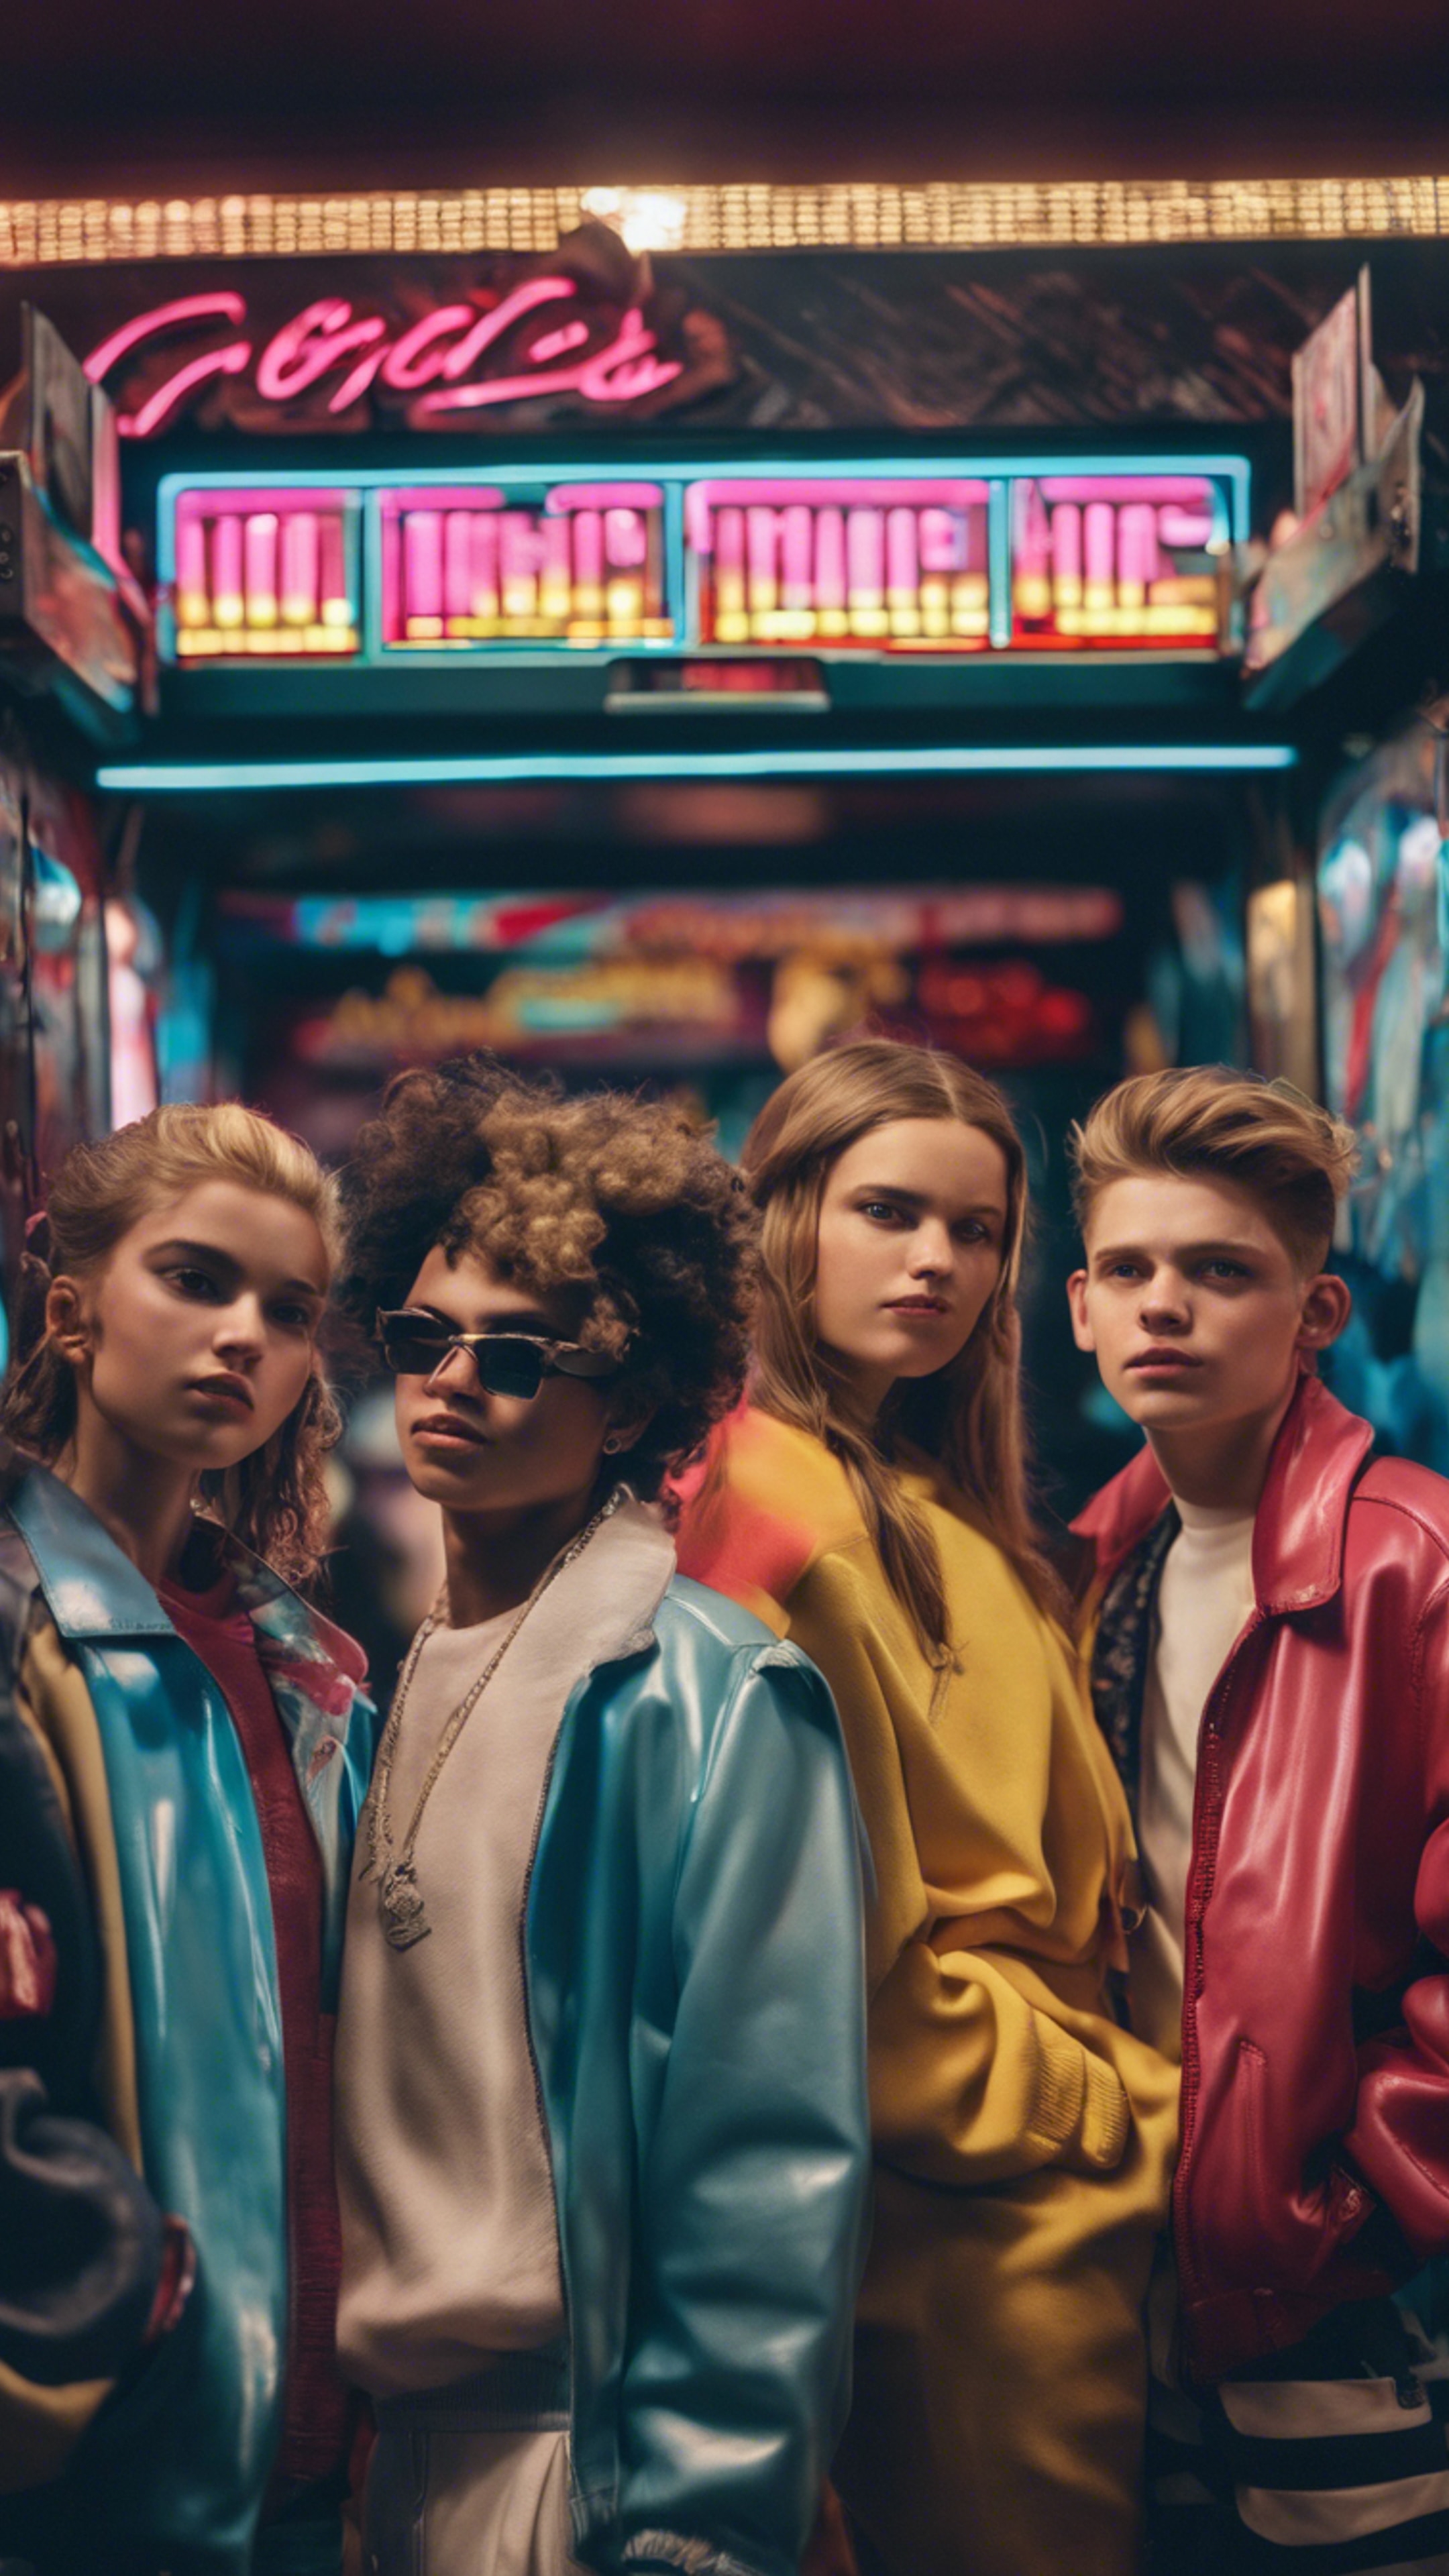 A group of teenagers dressed in iconic 80s fashion, hanging out at an arcade. วอลล์เปเปอร์[419df1d215924a4a865f]